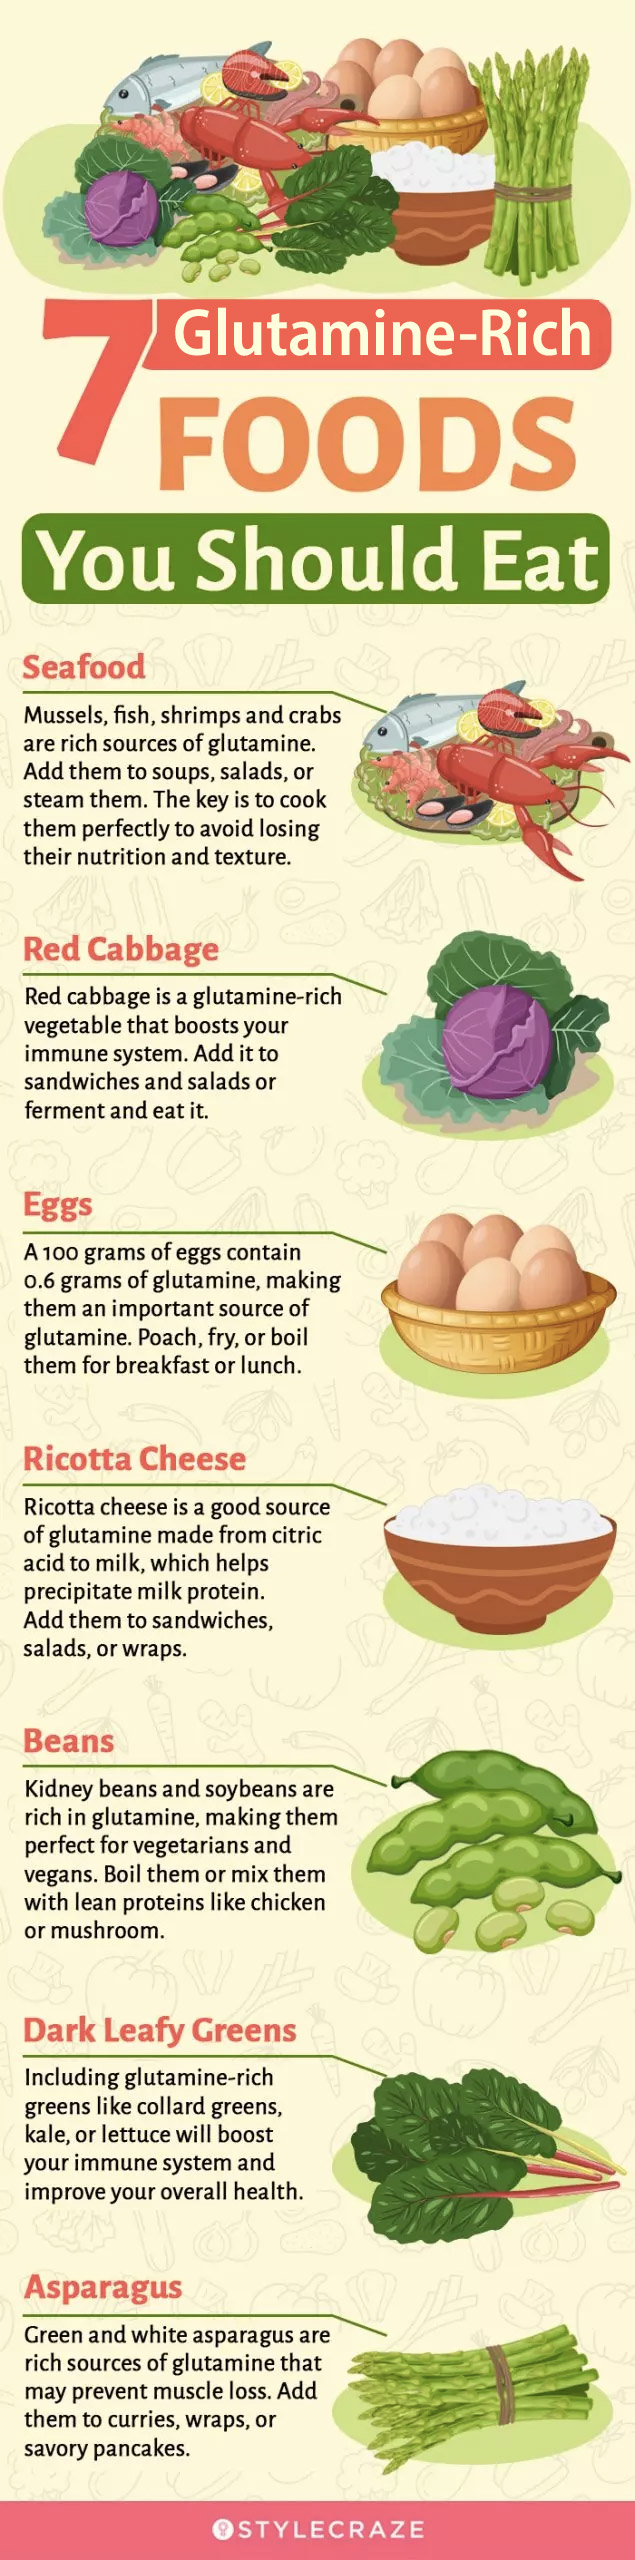 7 glutamine-rich foods you should eat (infographic)